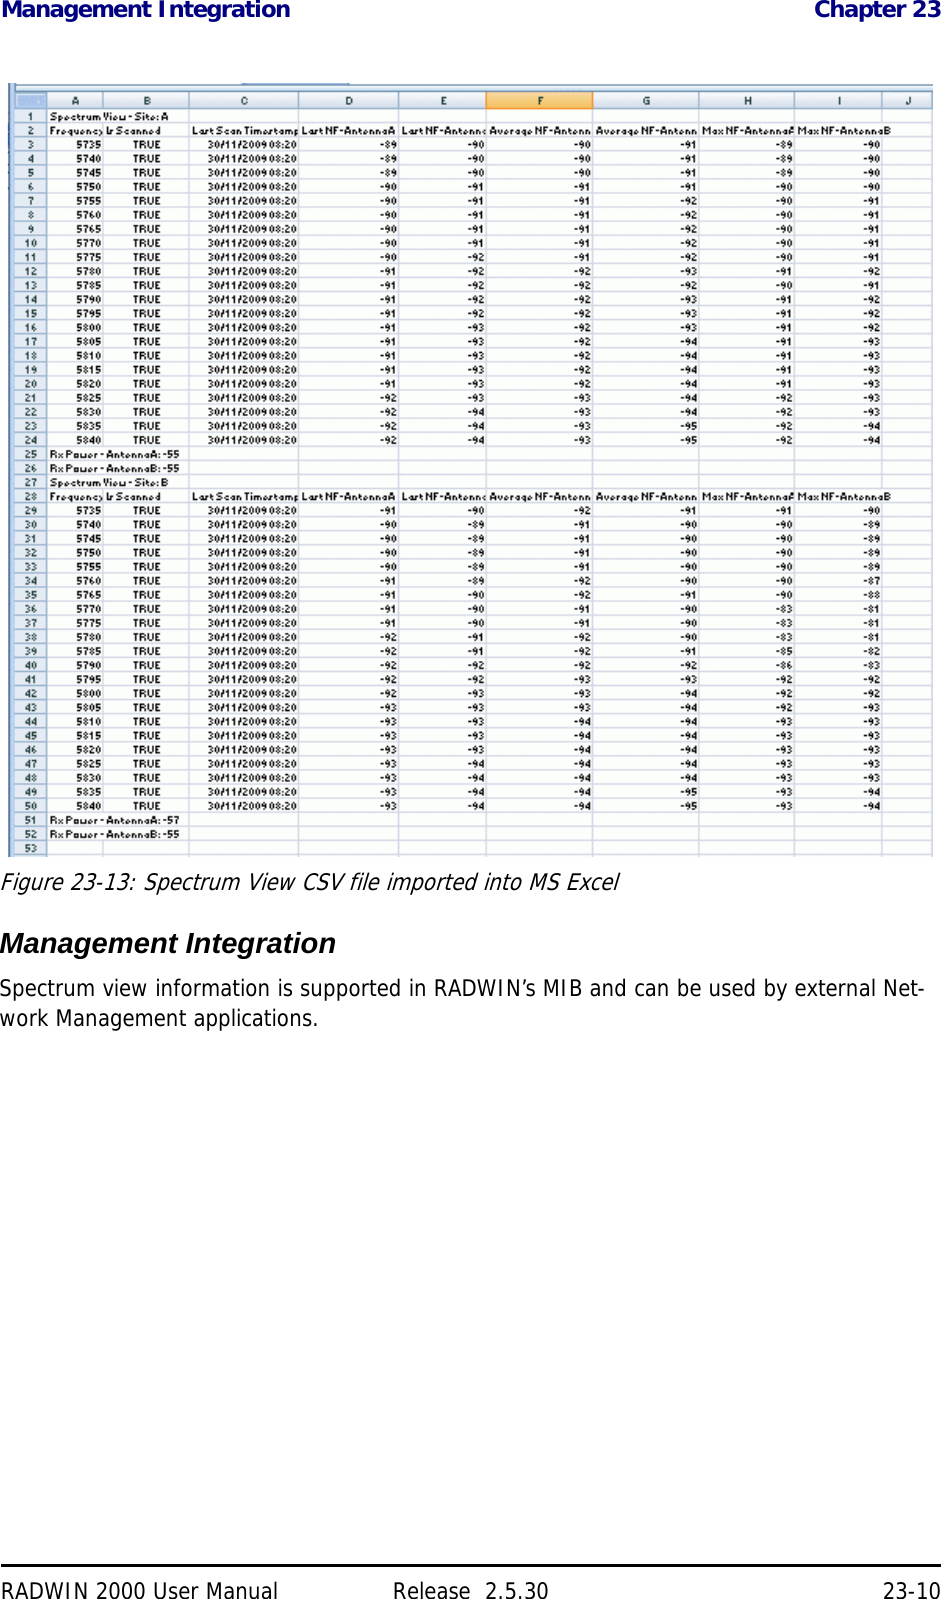 Management Integration Chapter 23RADWIN 2000 User Manual Release  2.5.30 23-10Figure 23-13: Spectrum View CSV file imported into MS ExcelManagement IntegrationSpectrum view information is supported in RADWIN’s MIB and can be used by external Net-work Management applications. 